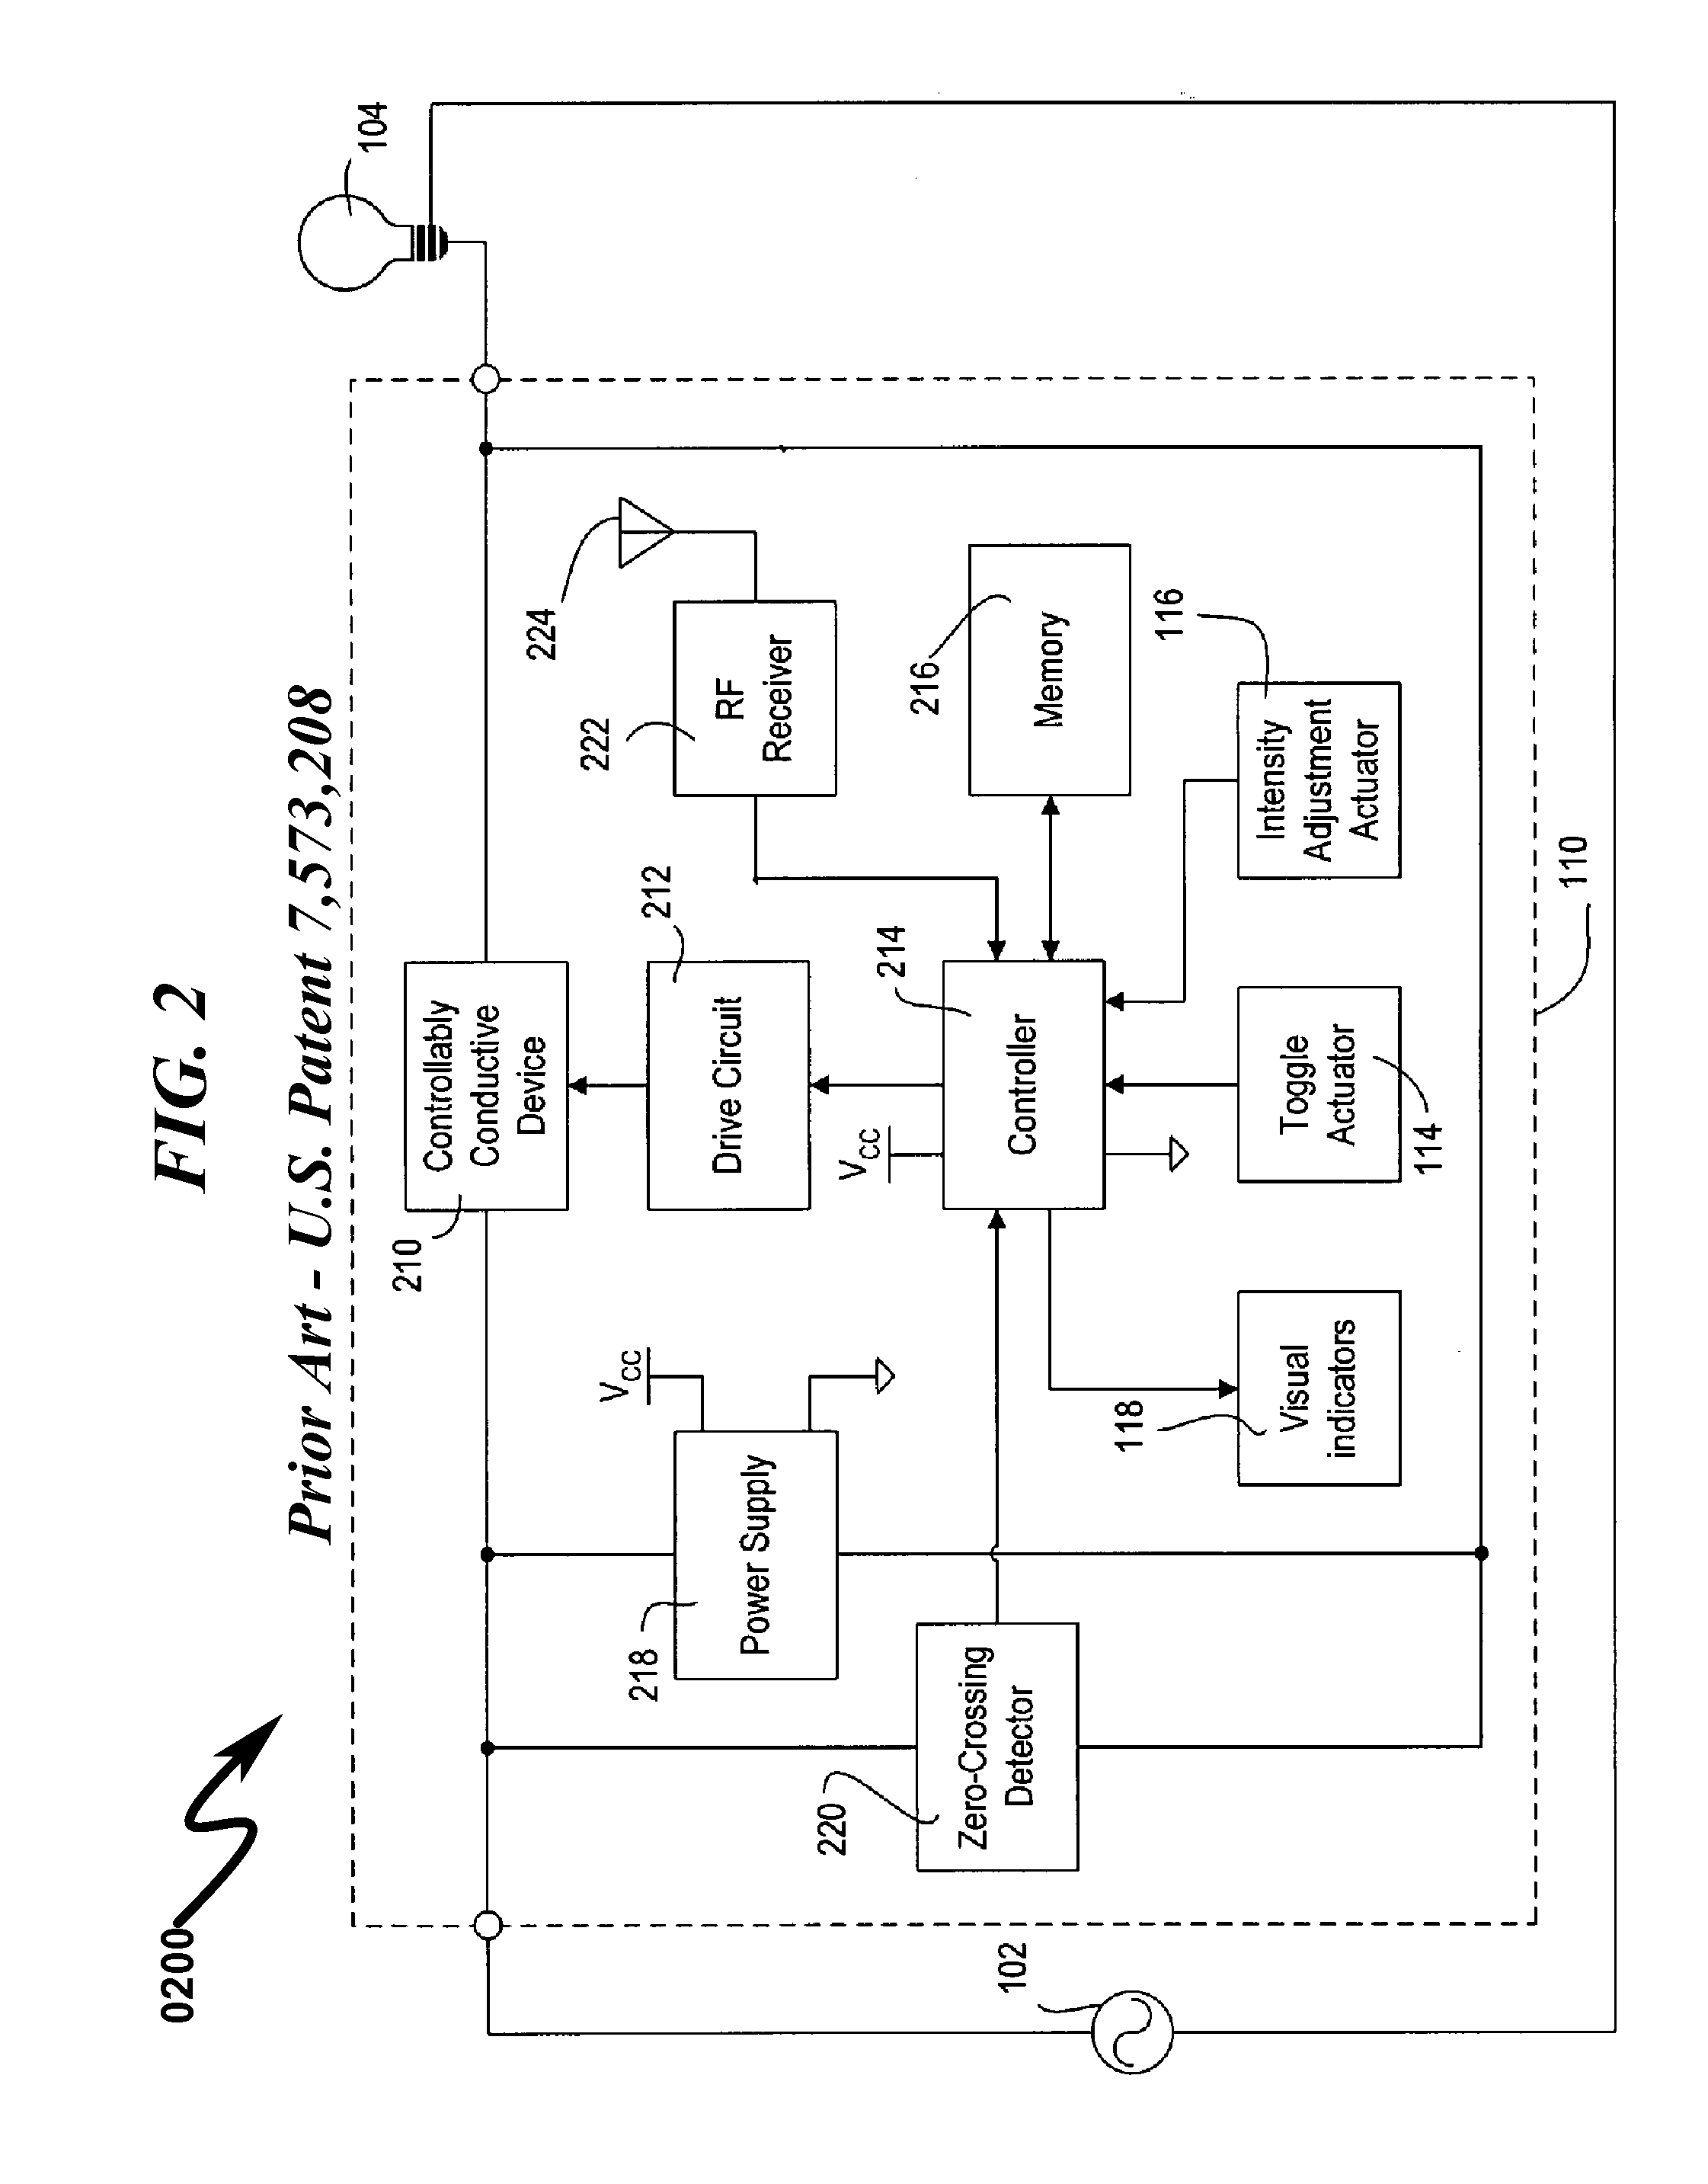 Light fixture monitoring-control system and method